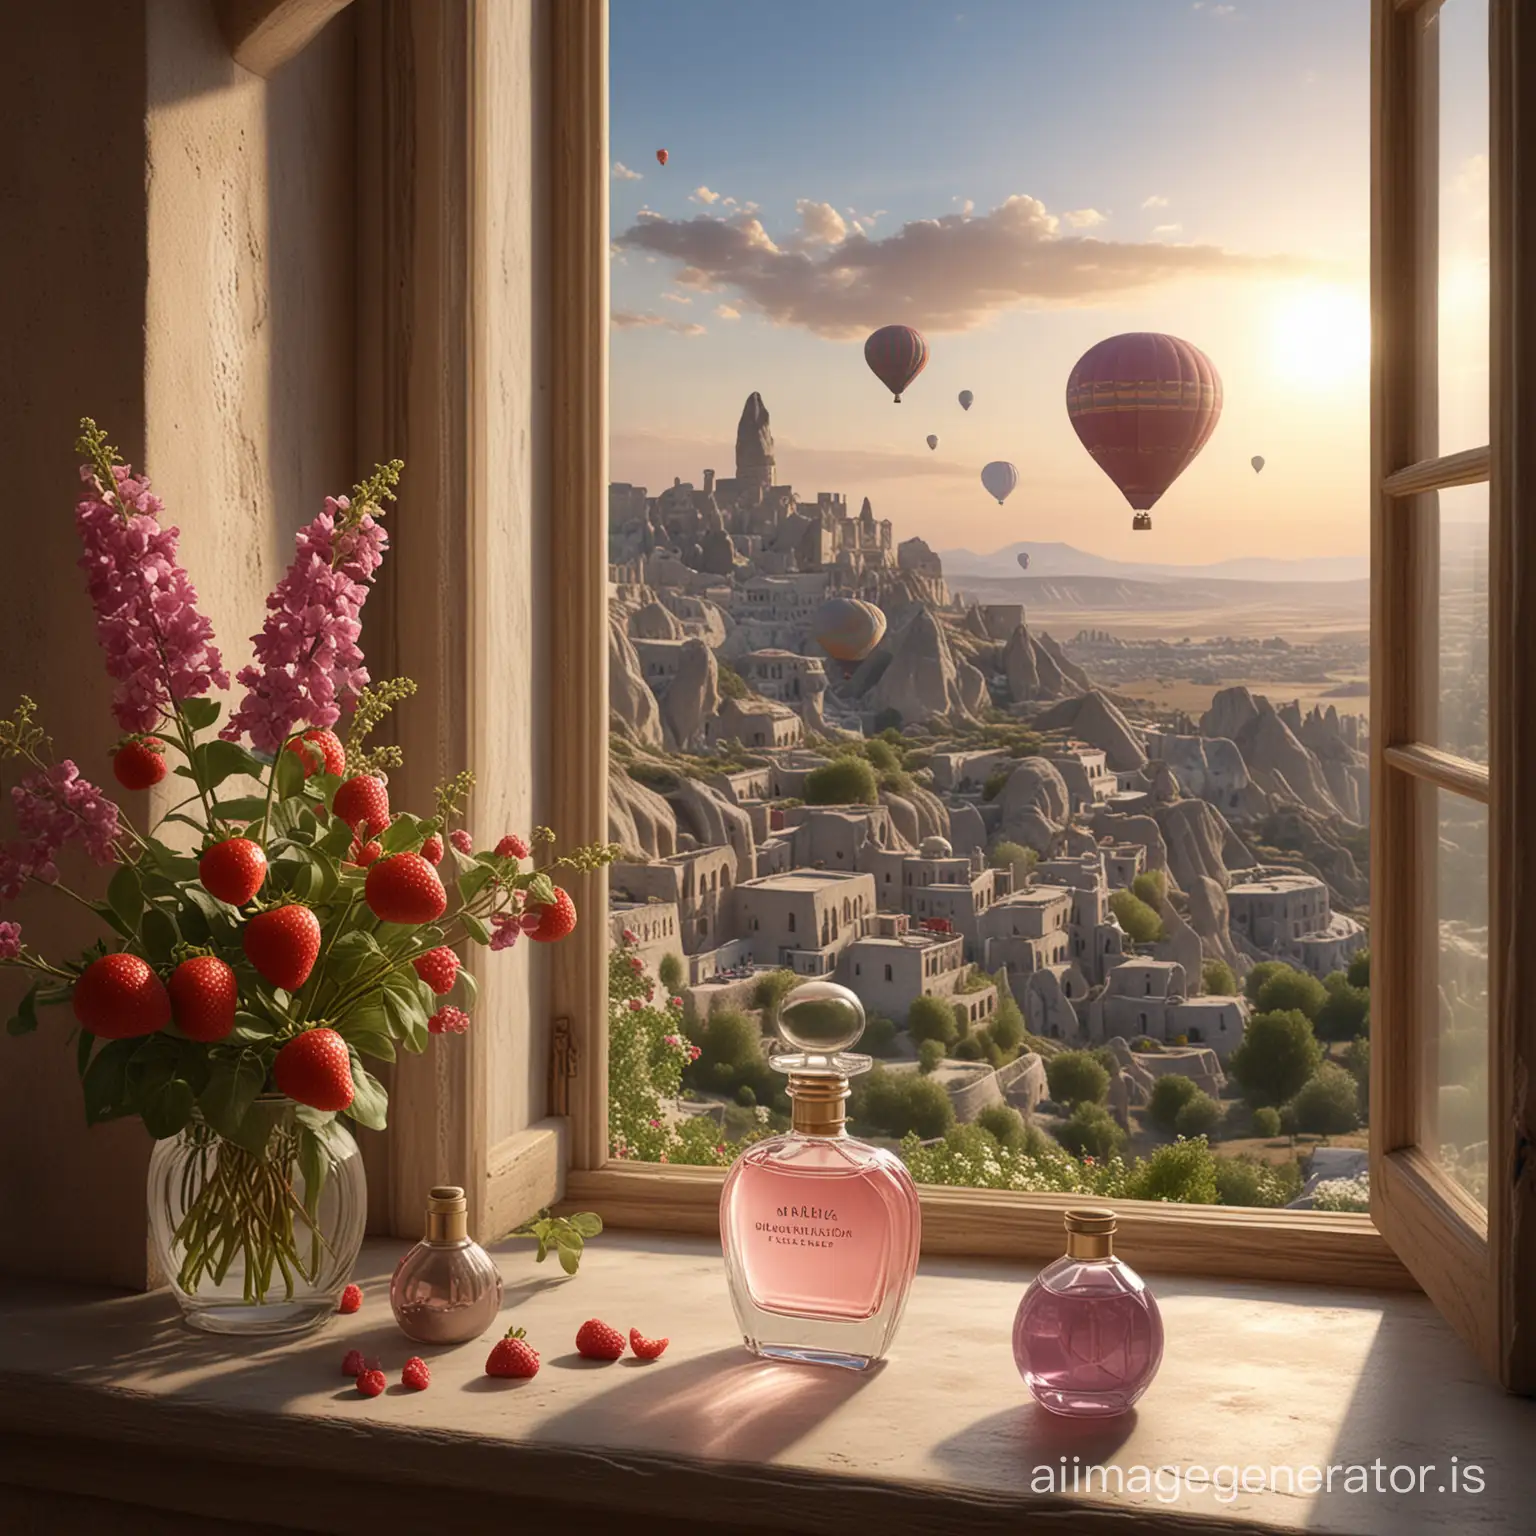 A hyper-realistic 3d rendering of a perfume product on the edge of a house window beside the perfume are strawberry, lime, berry fruits, and a vase filled with patchouli flowers with a background view of Cappadocia where there are many hot air balloons flying, Cappadocia stone hills and hot air balloons appear in the distance, the rays passing through the window highlight the perfume, the atmosphere is romantic with a purplish sky.